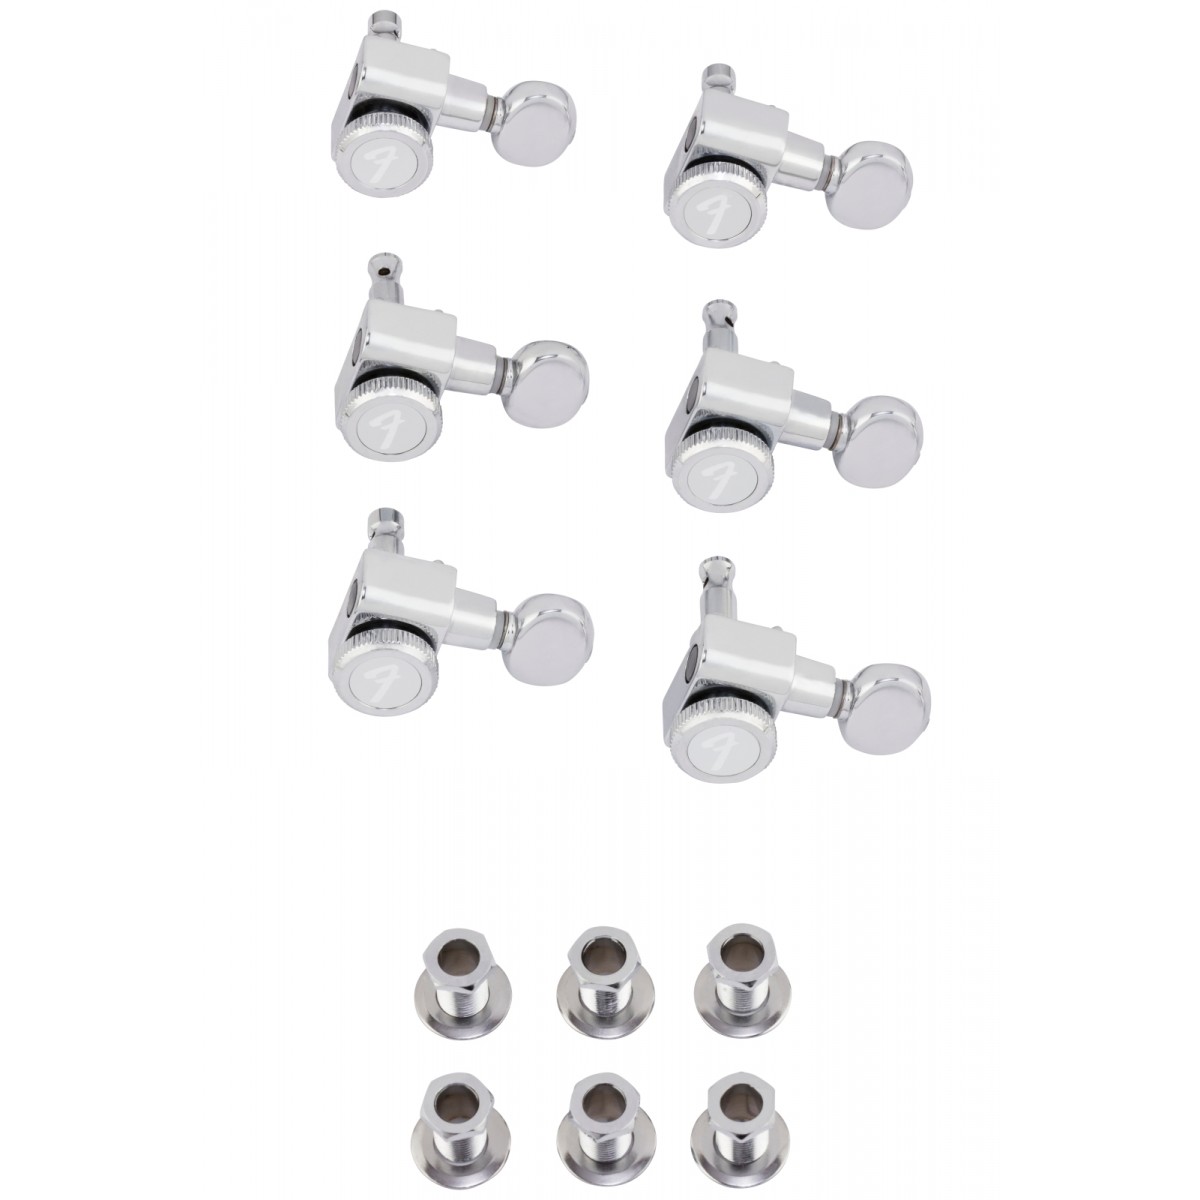 Fender Parts Staggered Locking Tuners with Vintage-Style Buttons Polished Chrome 0990818500